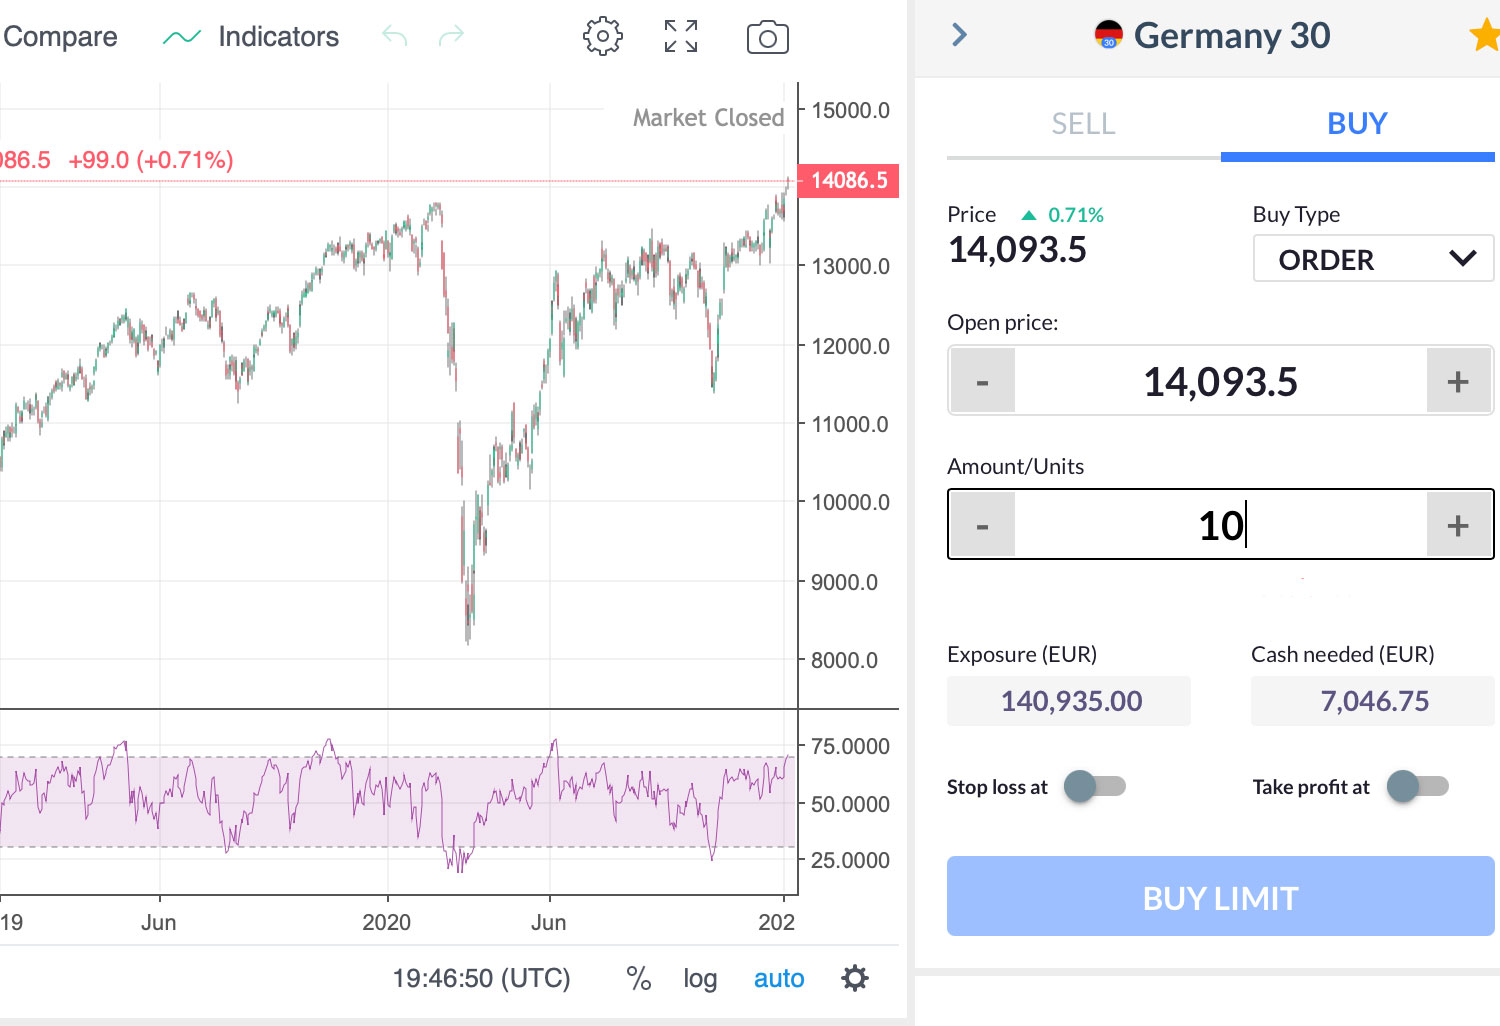 The Dax Index: Time To Start Shorting or Go Long?